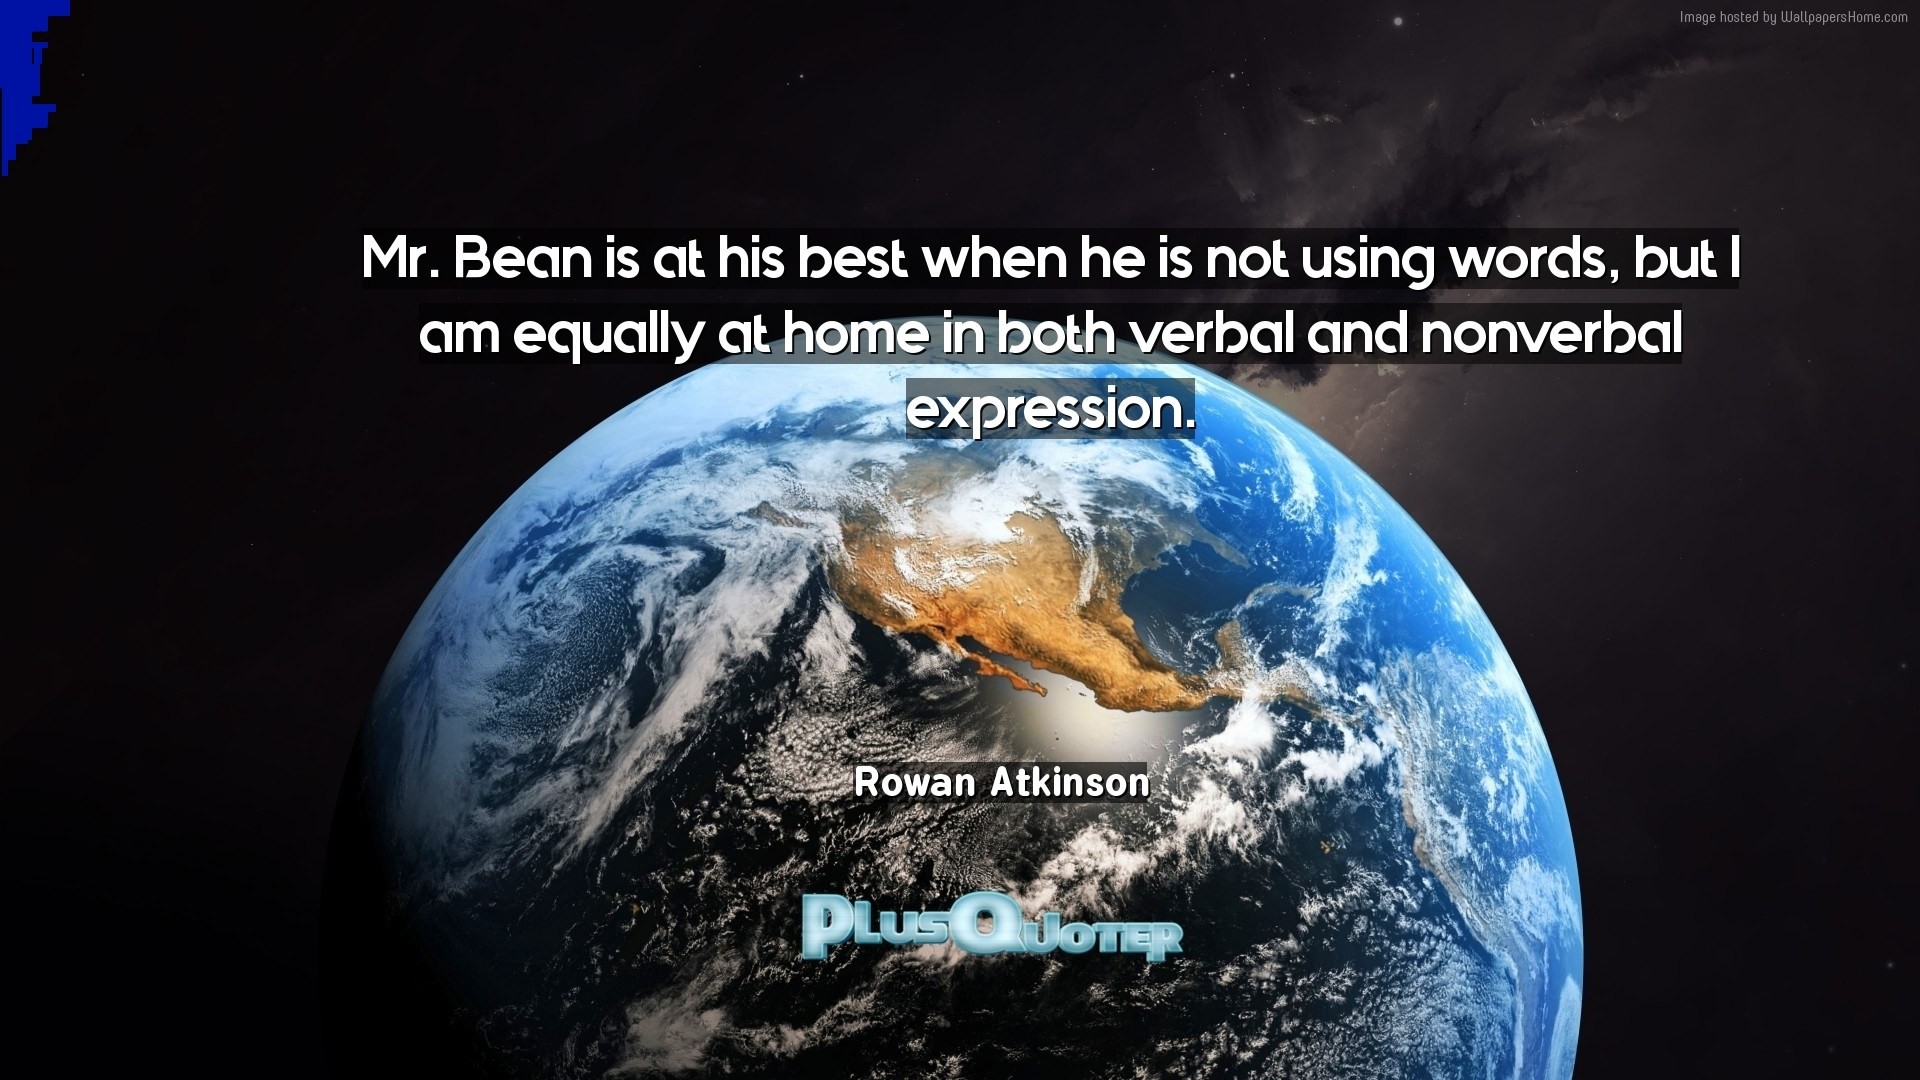 1920x1080 Download Wallpaper with inspirational Quotes- "Mr. Bean is at his best when  he. “